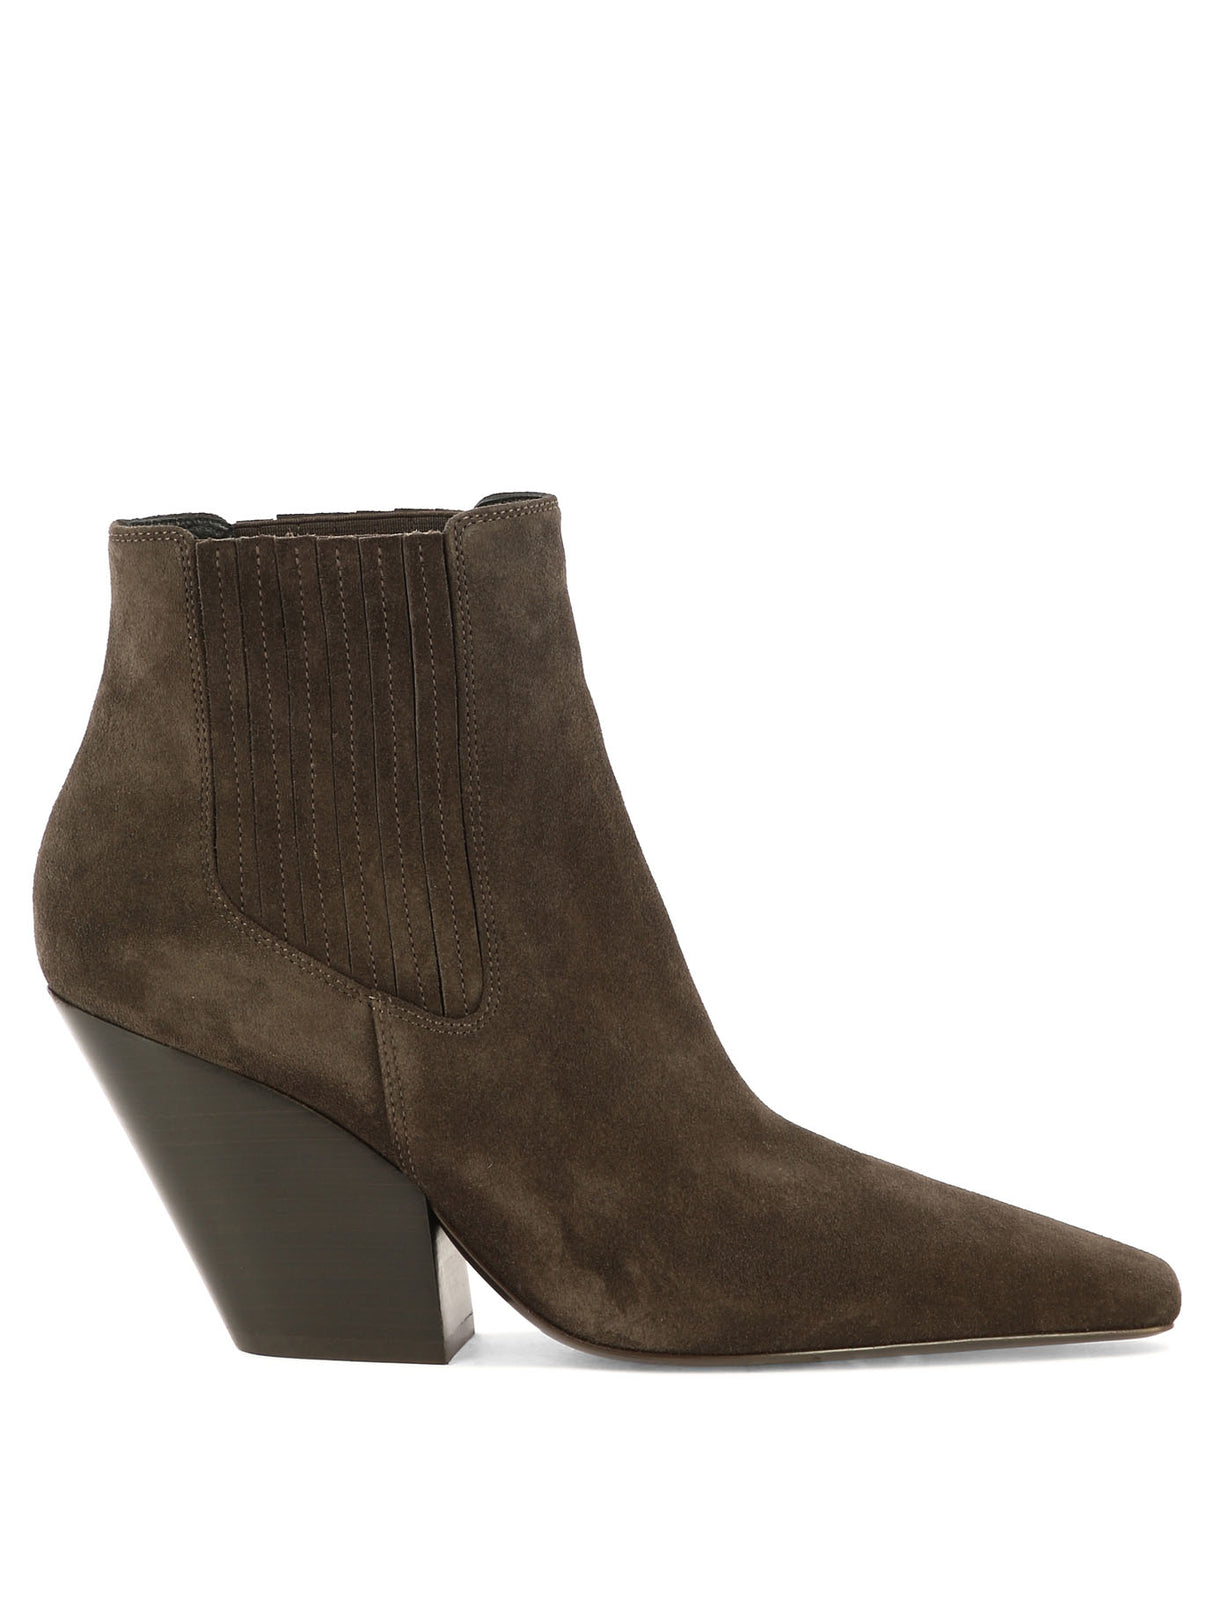 CASADEI Brown Suede Ankle Boots for Women - Slip-On Design with Leather Sole and Elasticated Panels